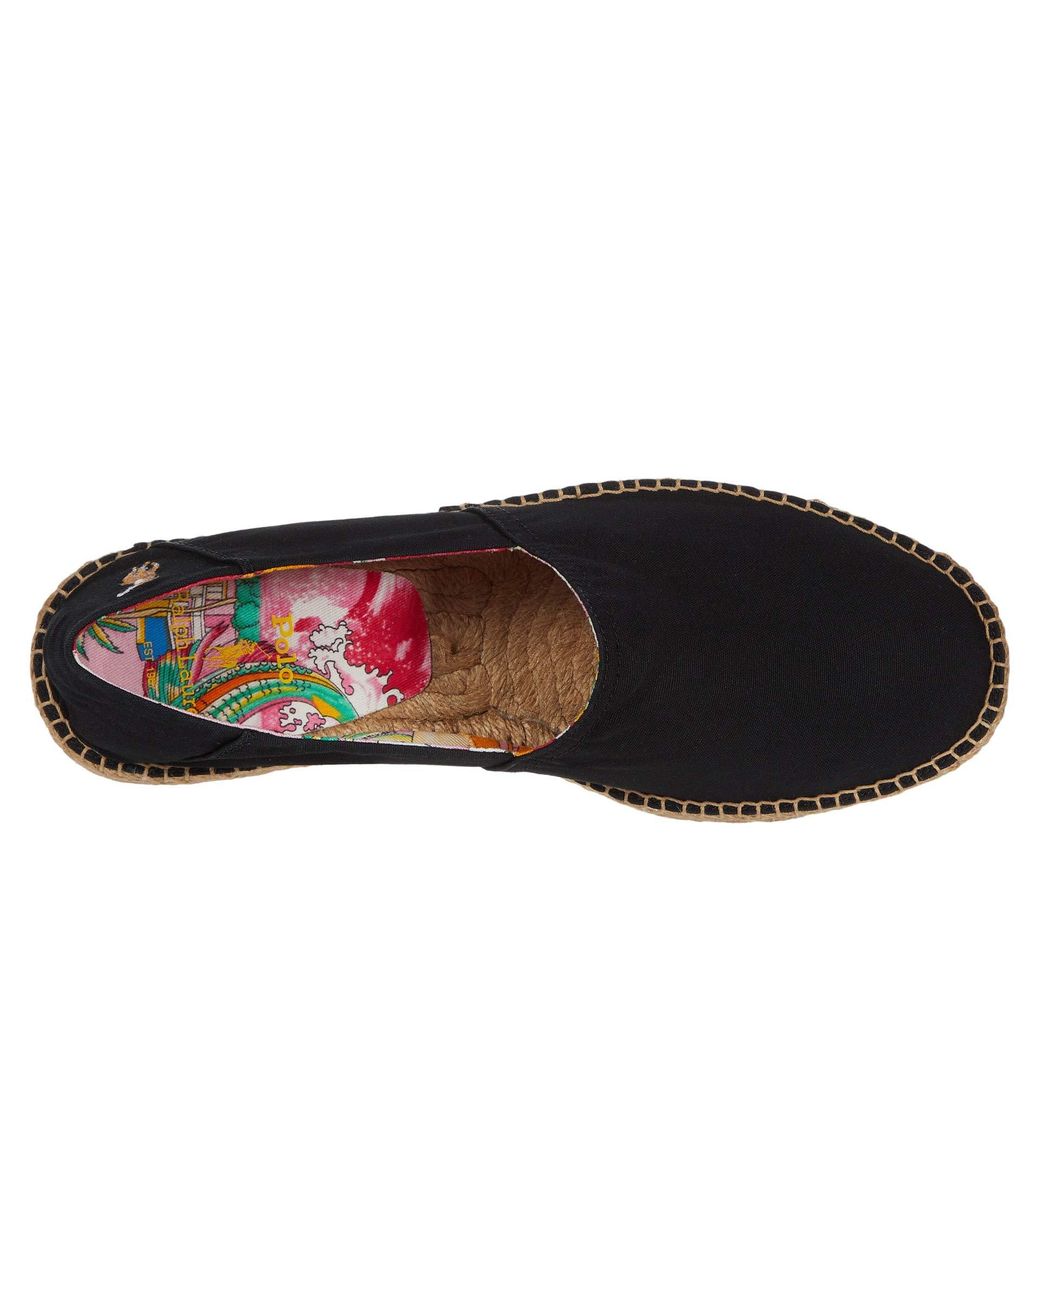 Modern Fashion Shoes Ralph Lauren Polomens Shoes Cevio Embroidered ...